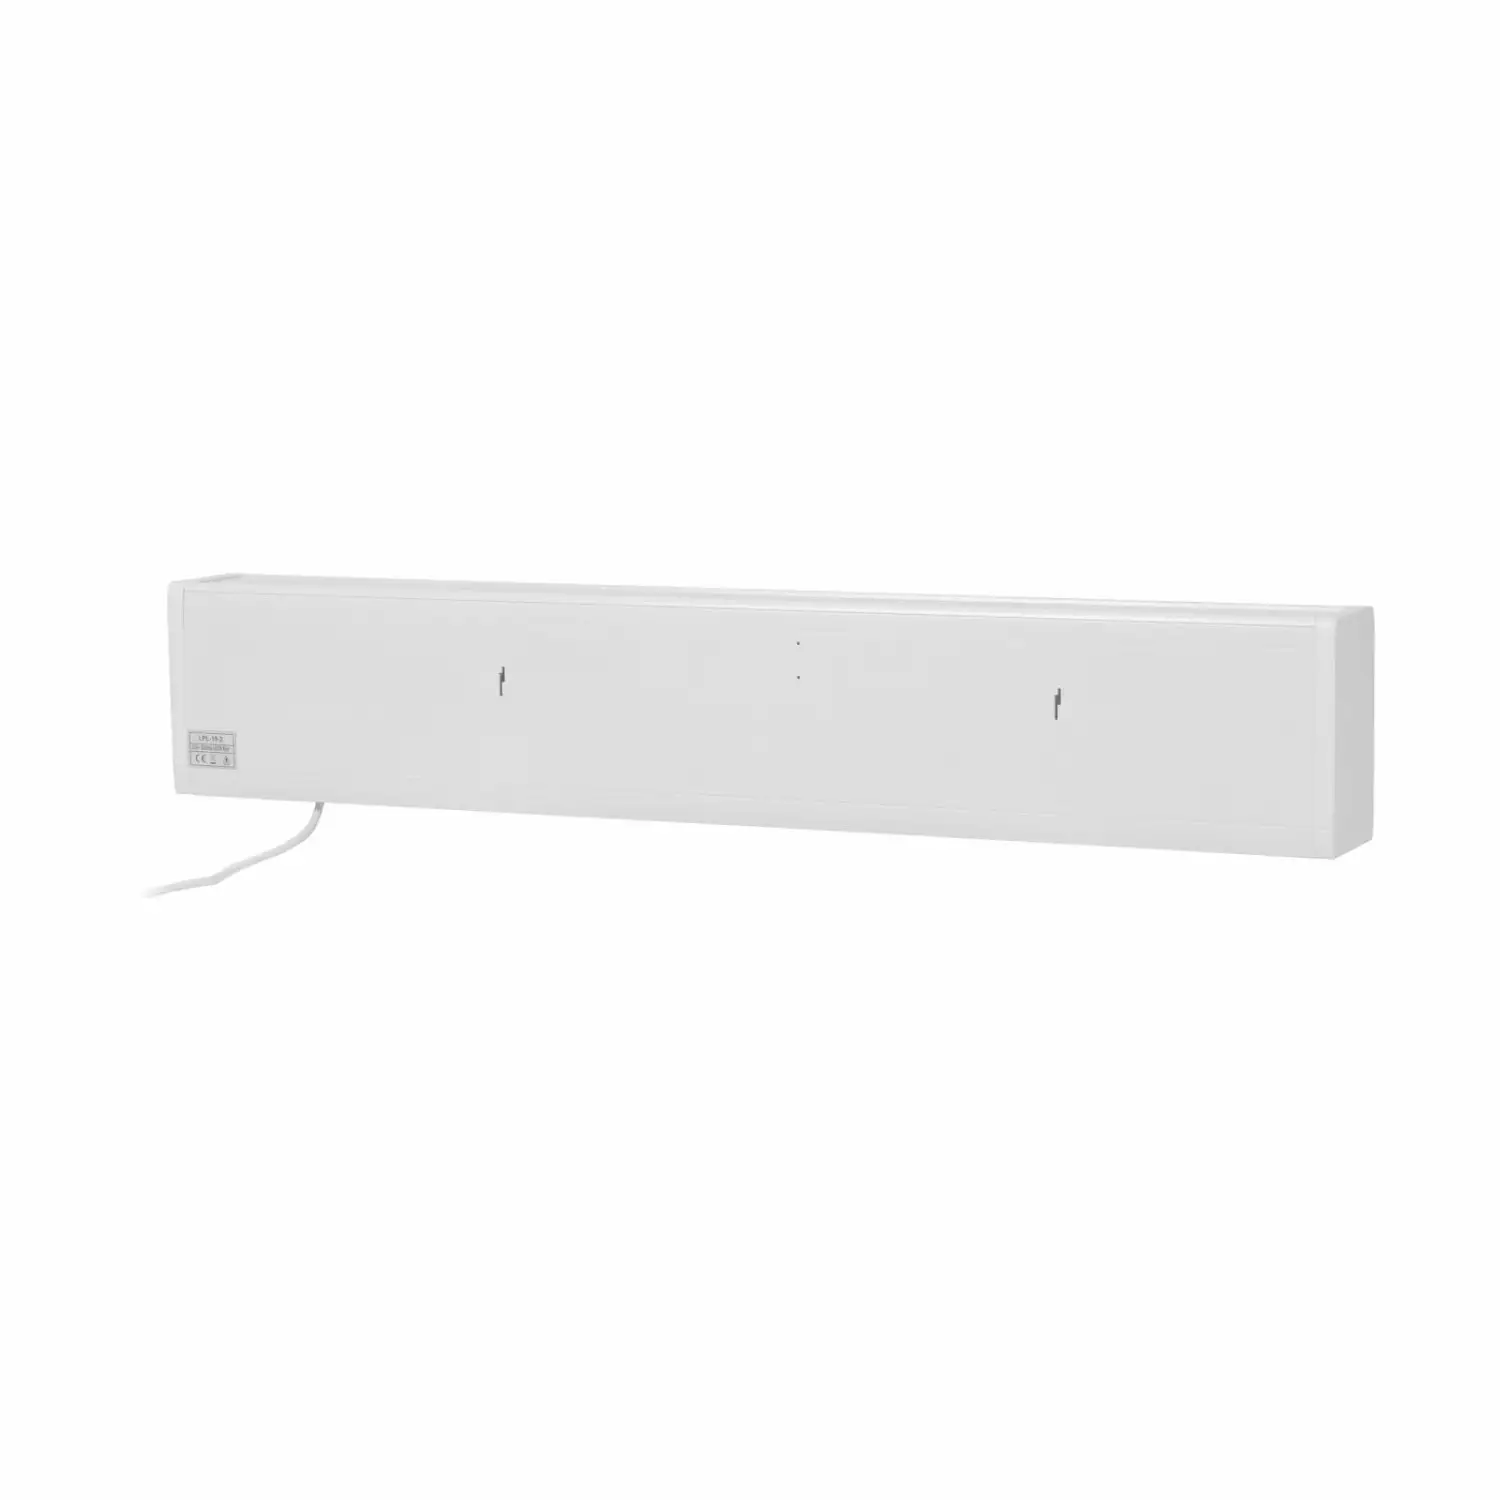 Eurom Alutherm Baseboard 1500 Wi-Fi White Convectorkachel - 1500W - 60m3-image